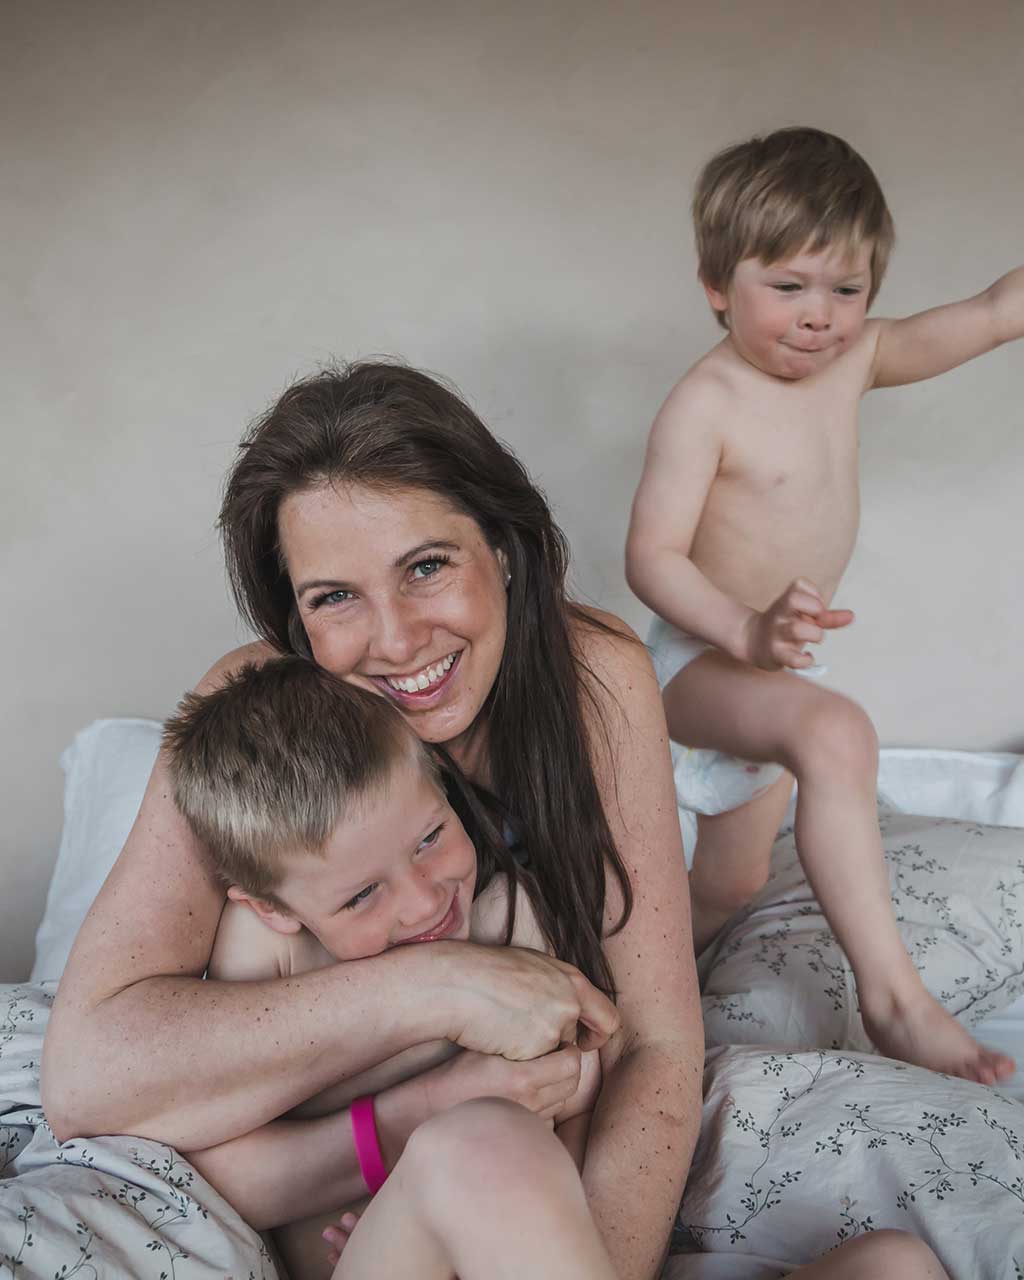 Garbo&Friends CEO, Emmelie Johansson and her sons jumping on the bed!